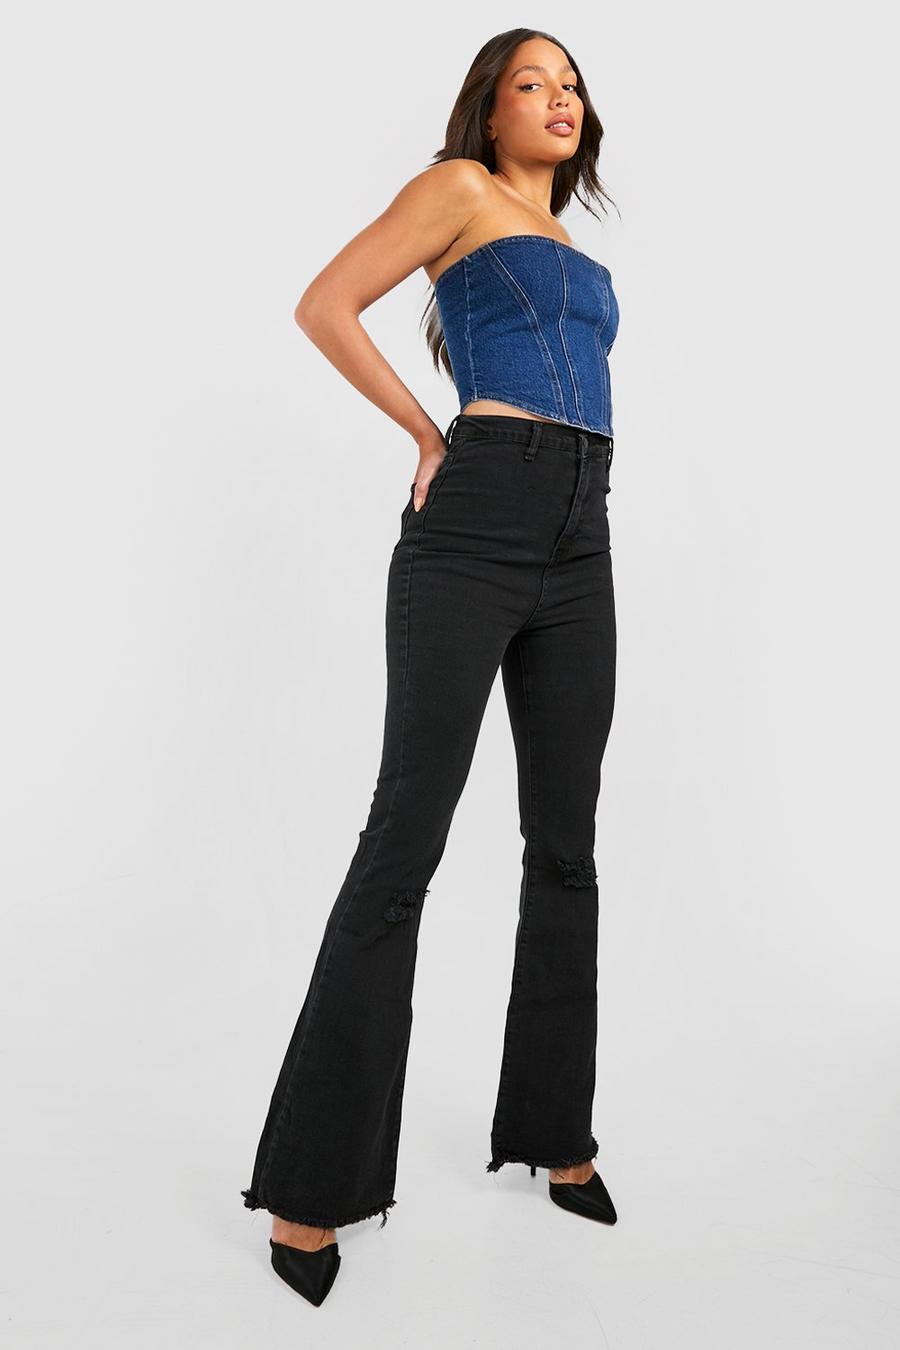 Black Tall High Waist Ripped Stretch Flare Jeans image number 1